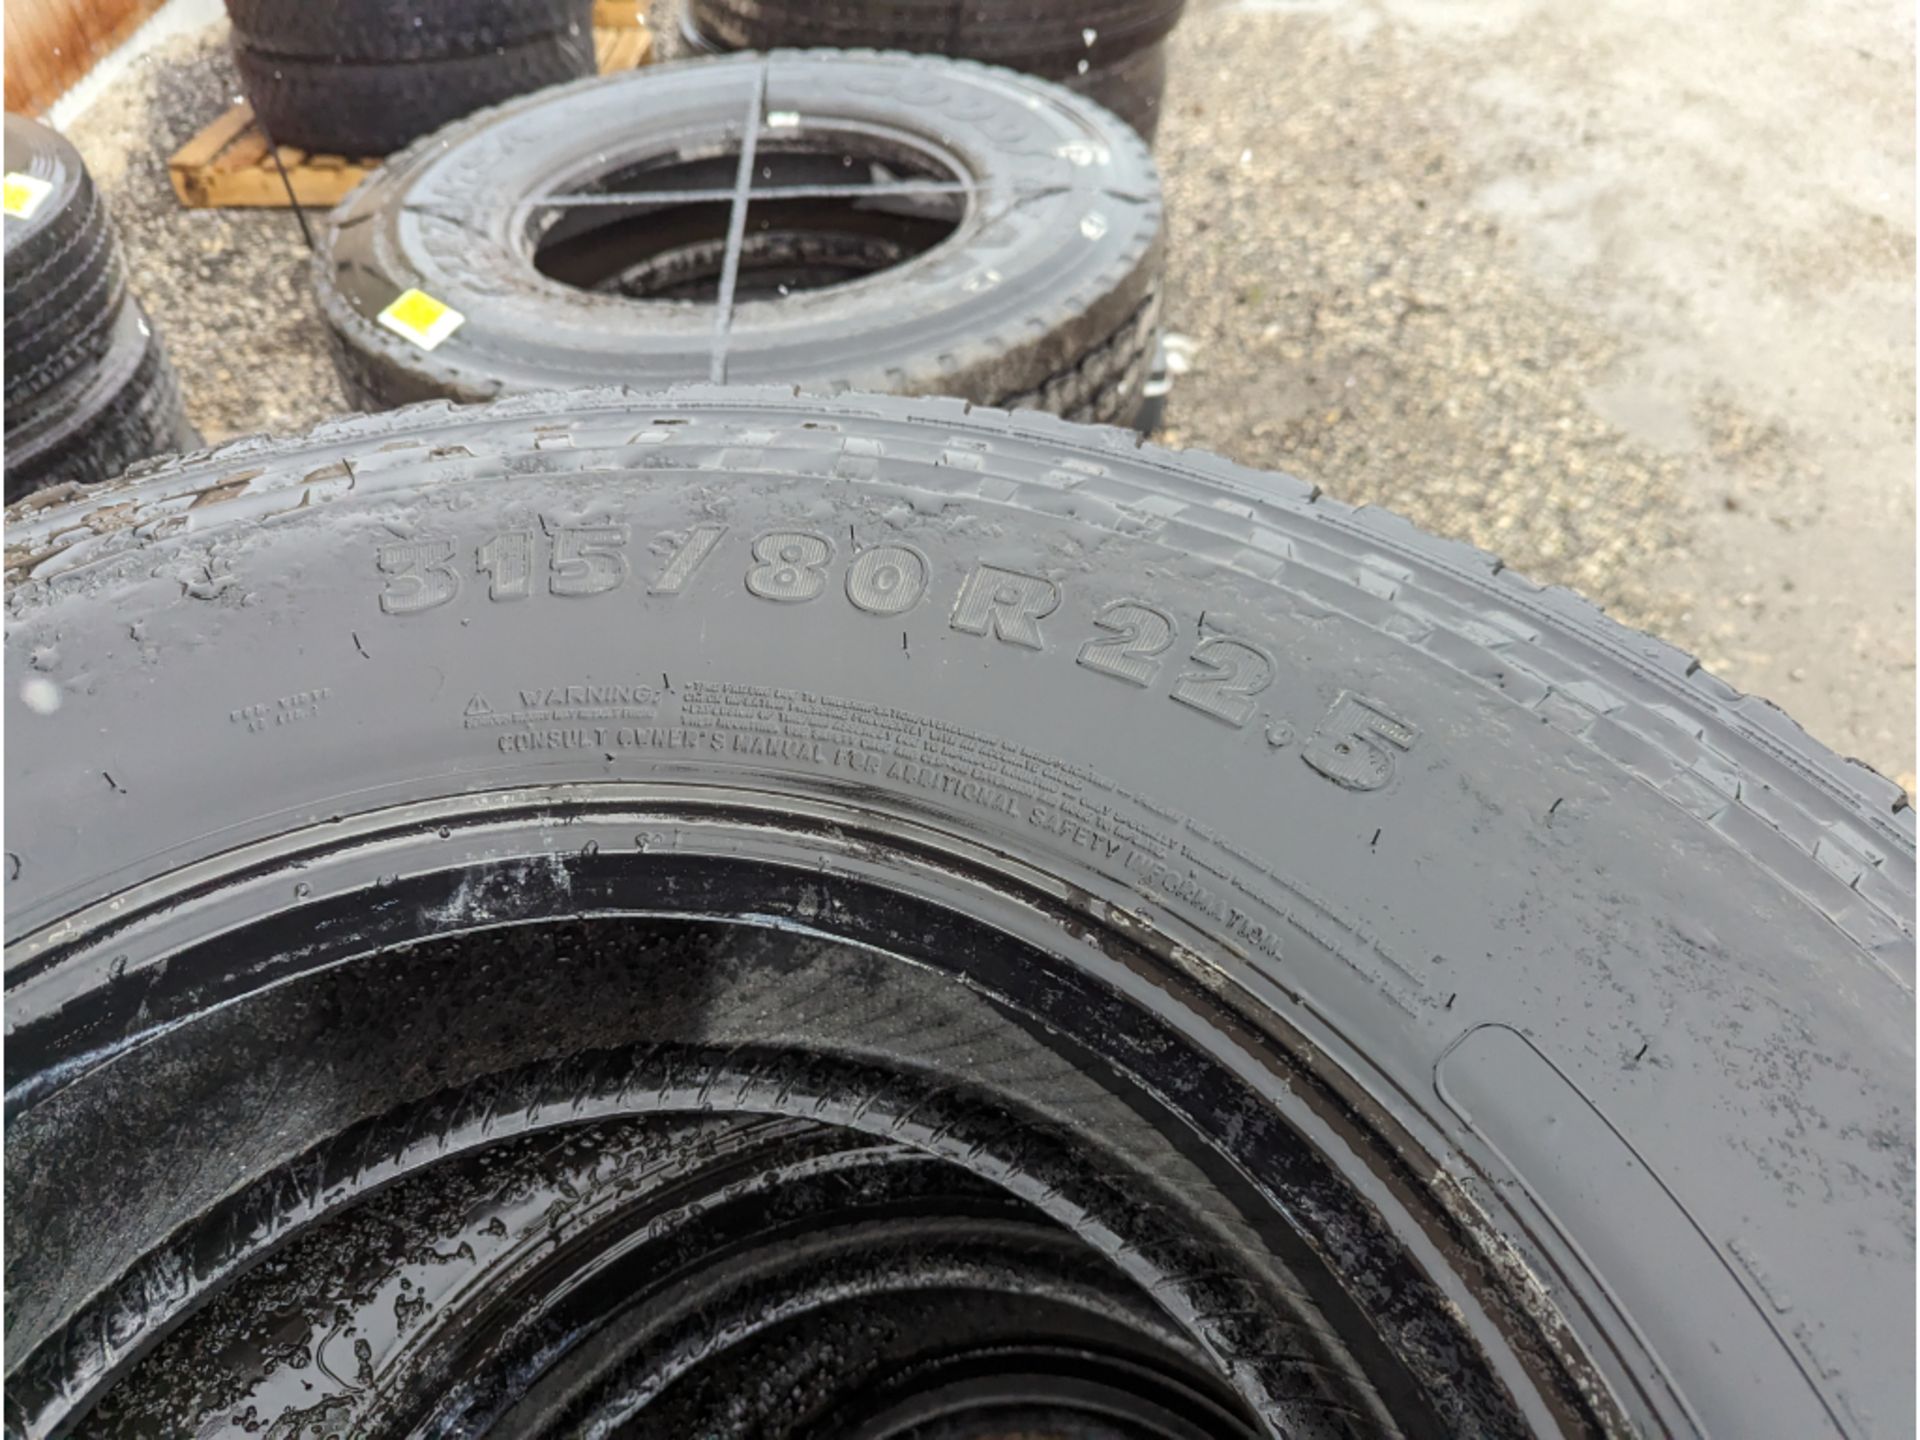 4 Michelin XZUS 2 315/80R22.5 commercial truck tires USED Virgin Tread Surplus Take Off - Image 4 of 5